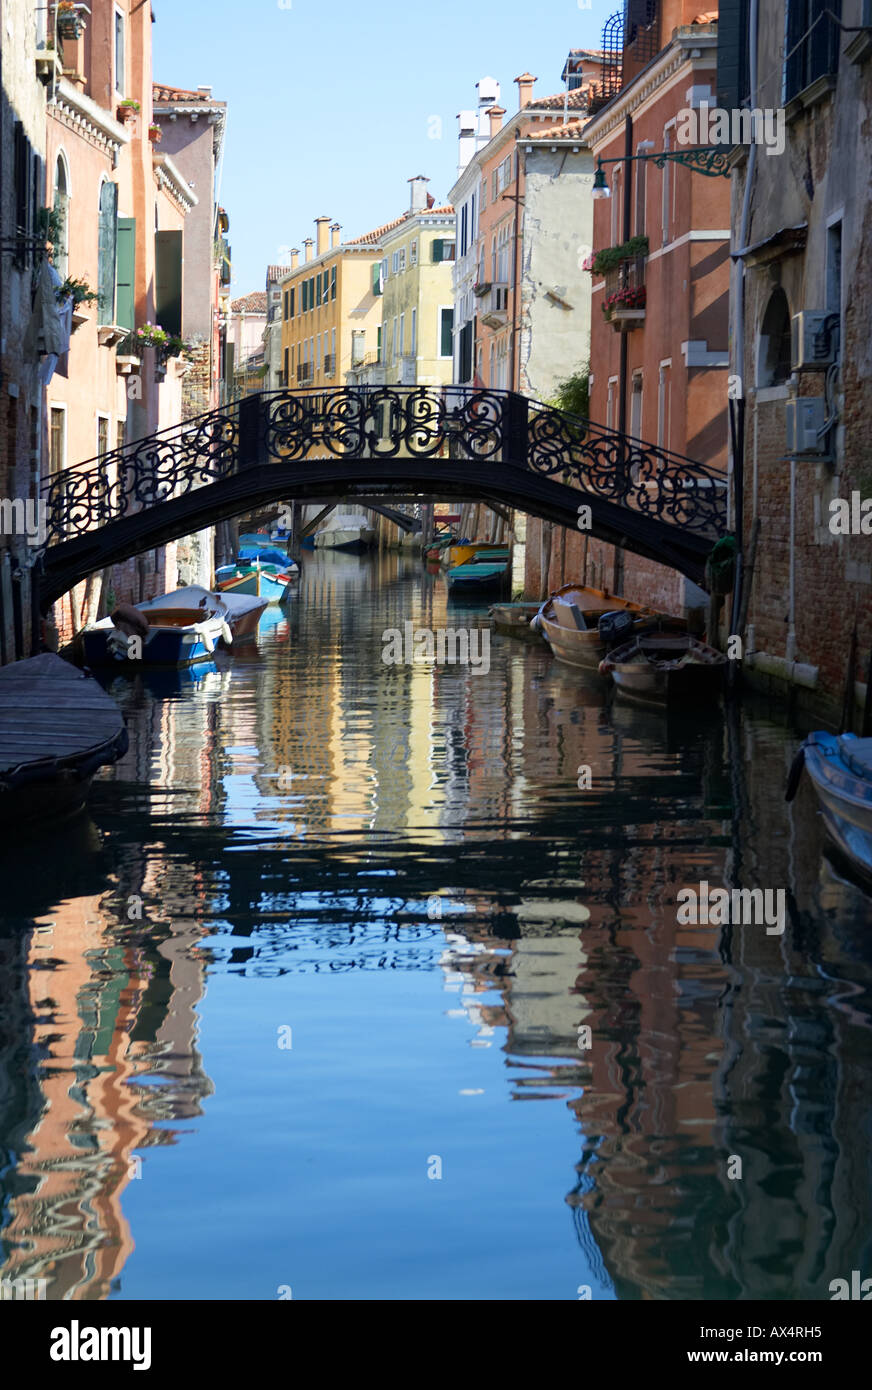 Typical Venetian canal view Venice Stock Photo